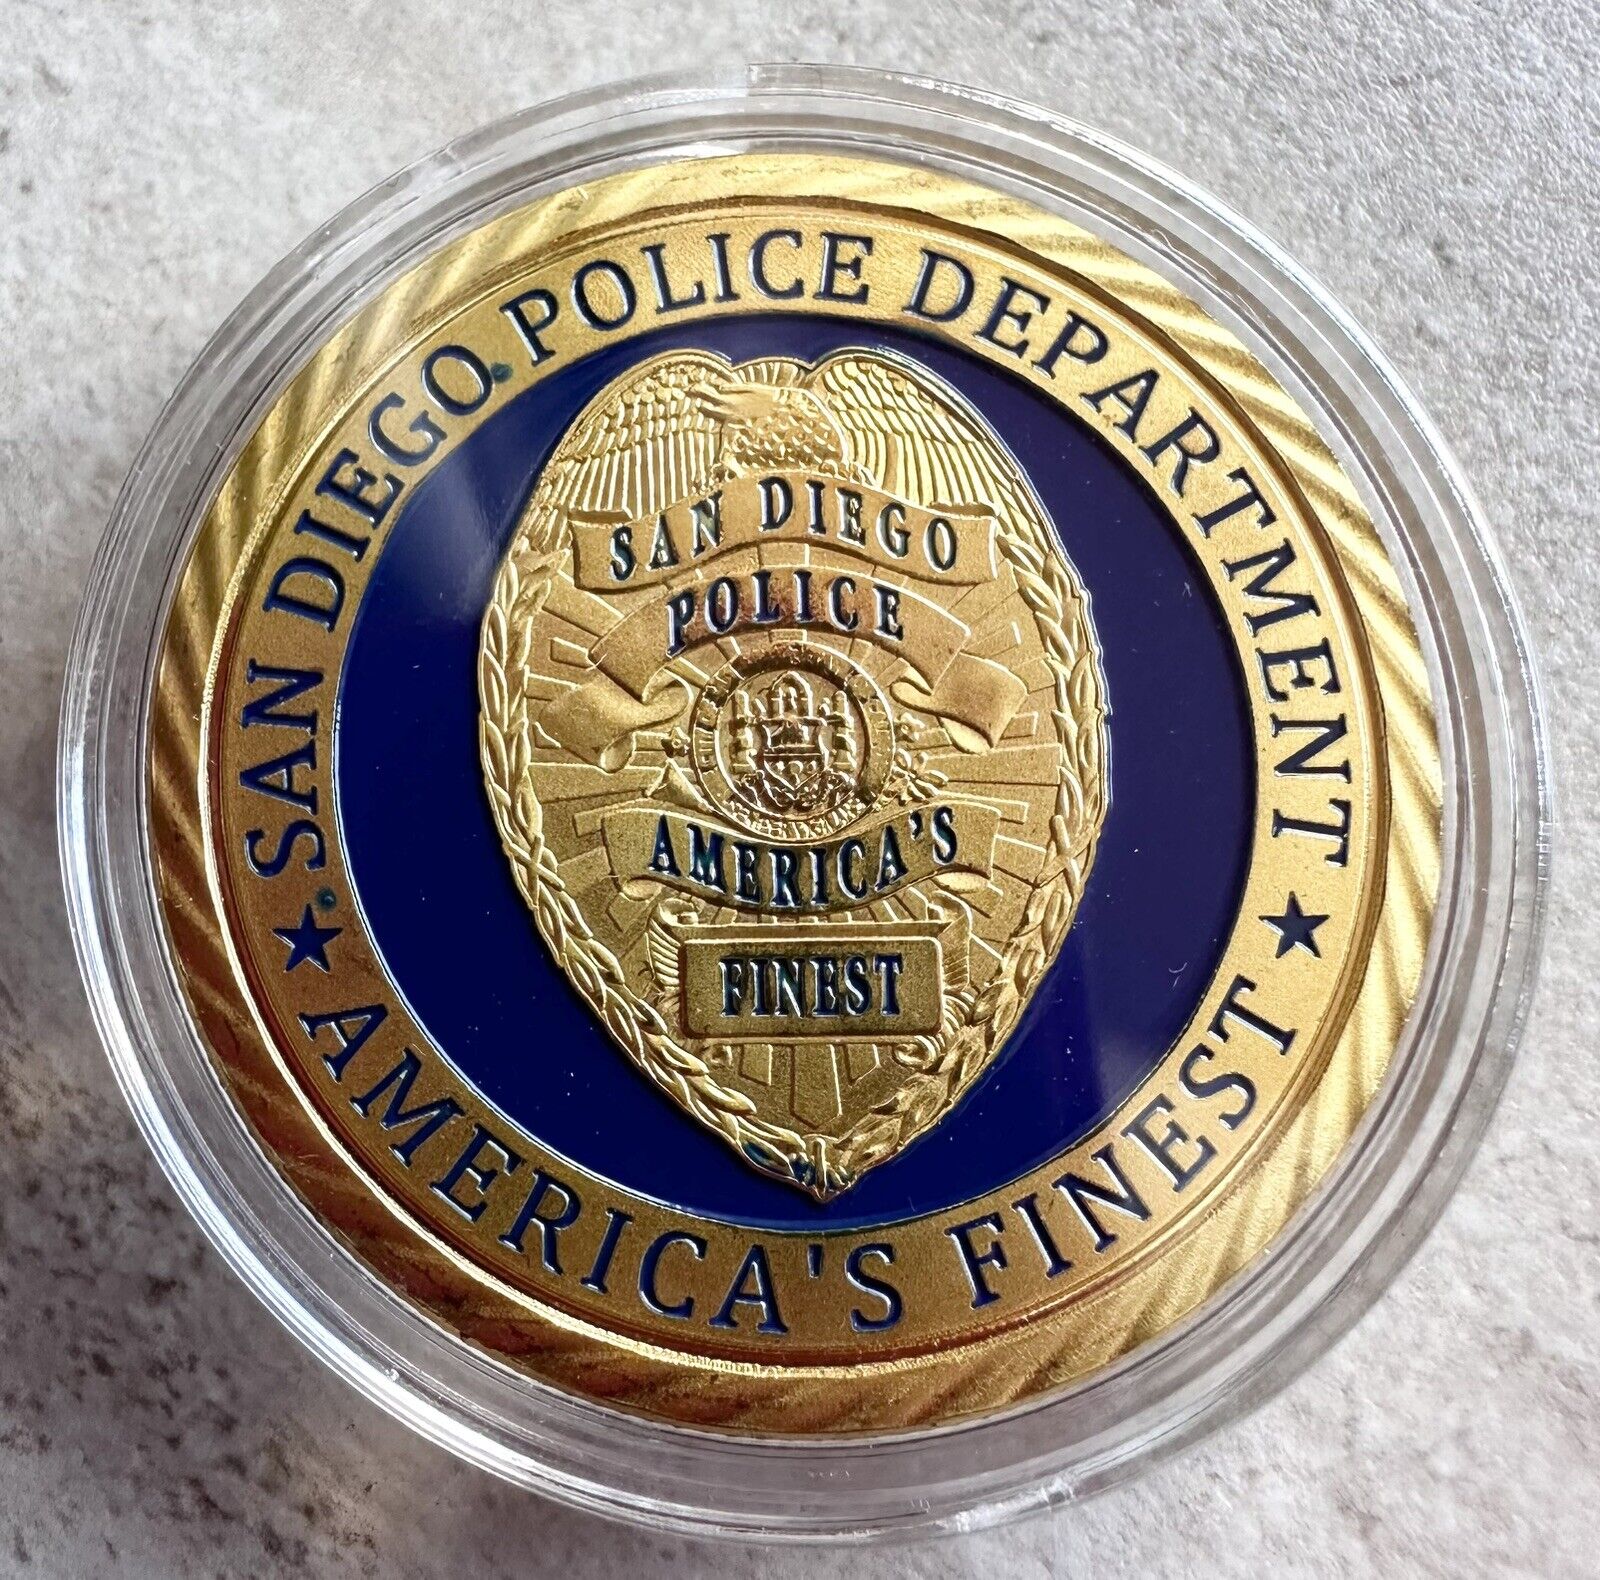 CITY OF SAN DIEGO POLICE DEPT Challenge Coin